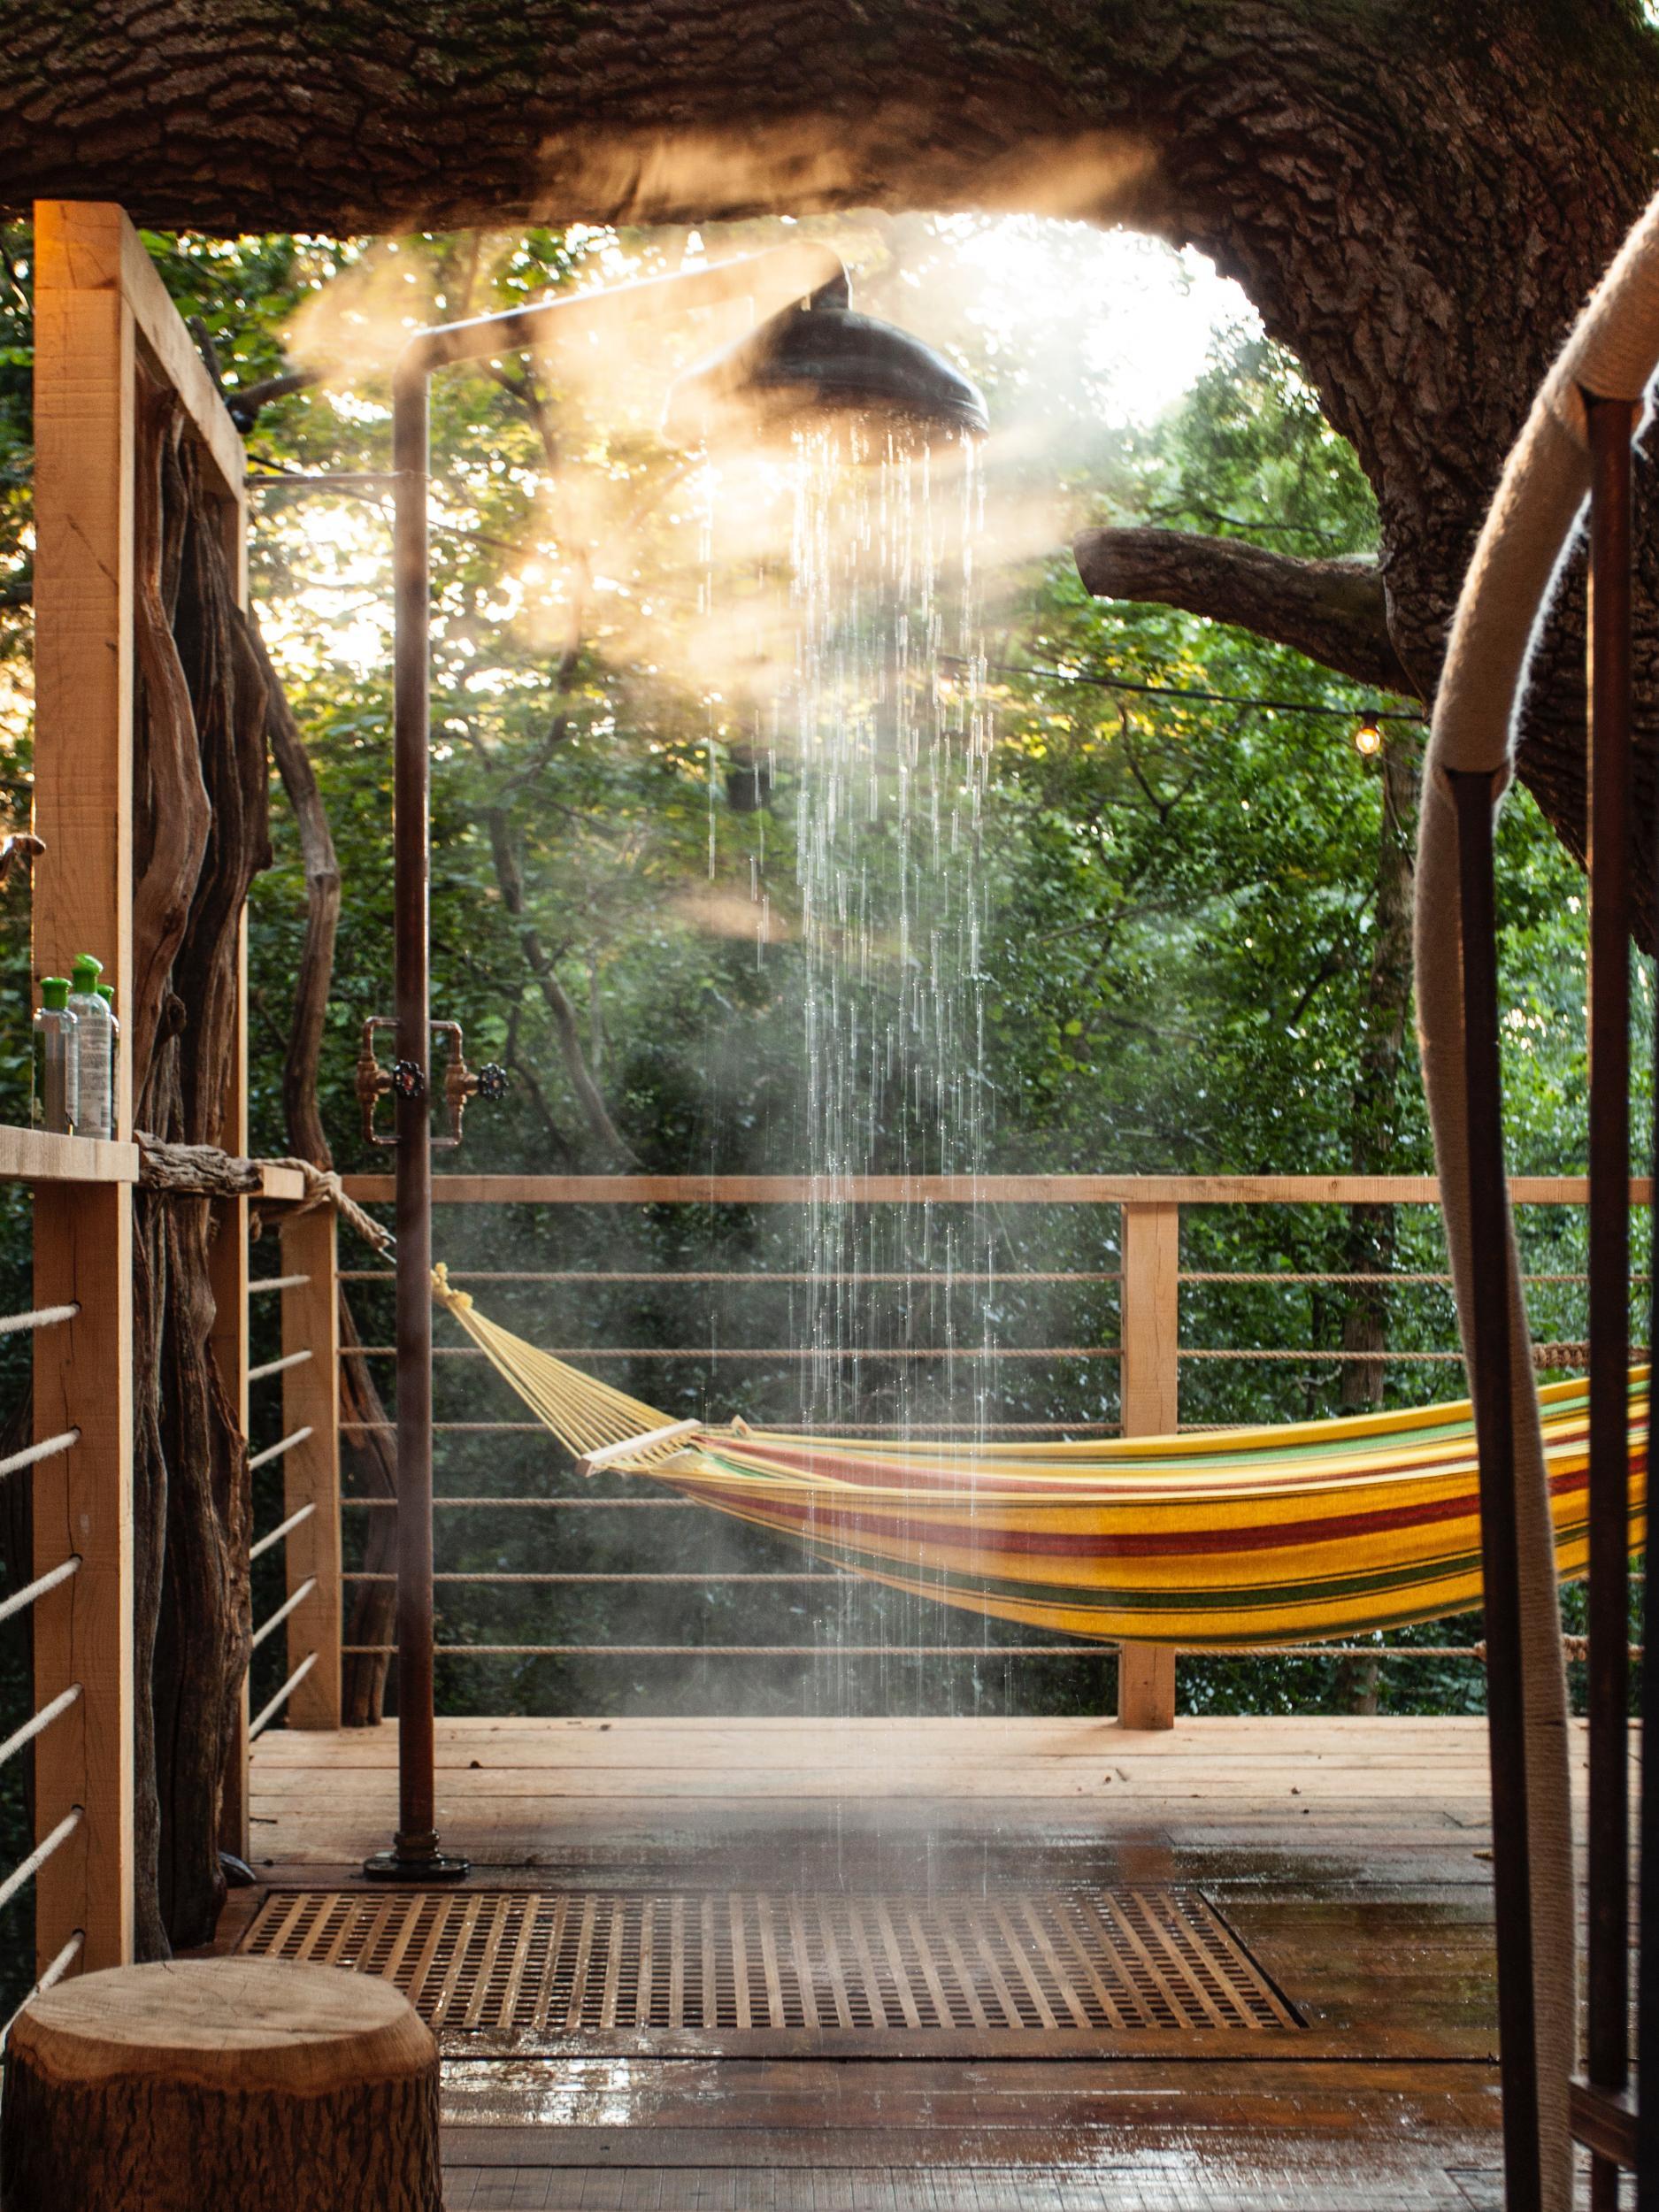 The treehouse also features an outdoor shower